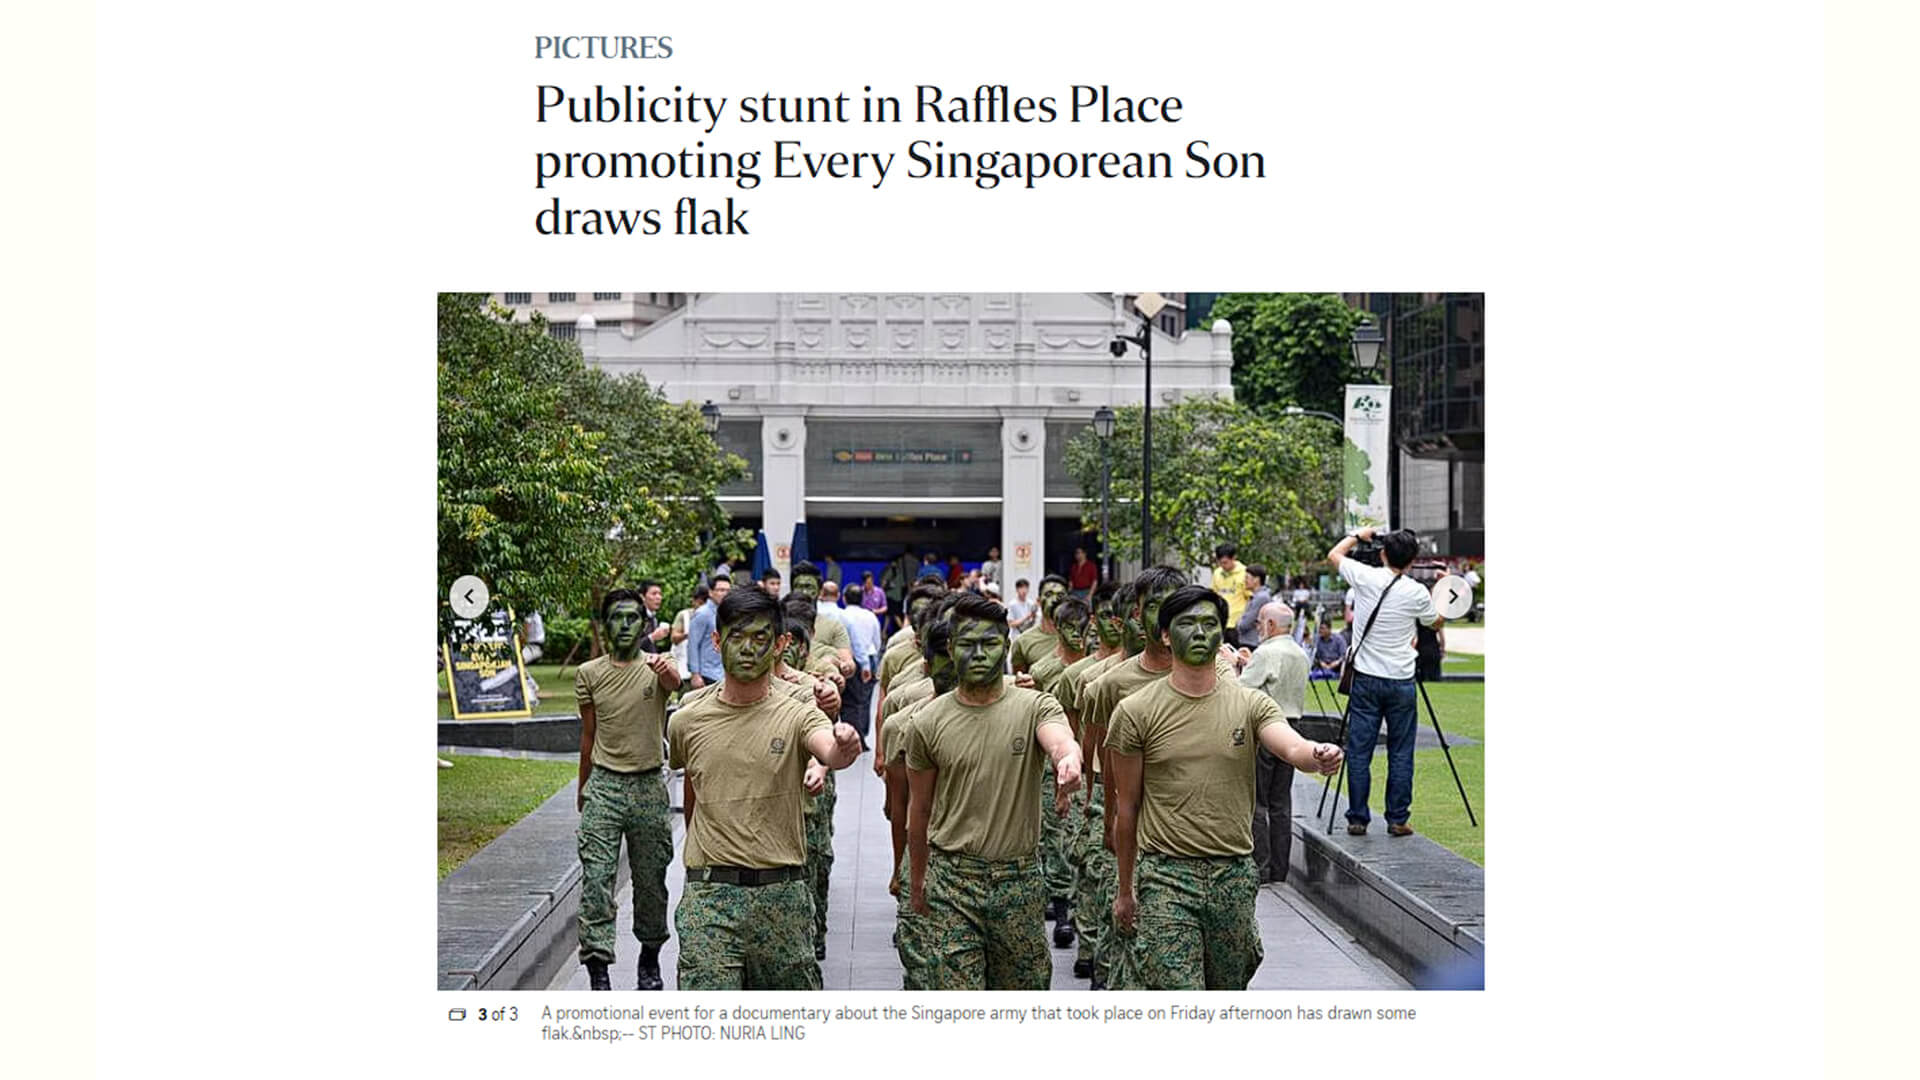 Every-Singaporean-Son Publicity Stunt by National Geographic